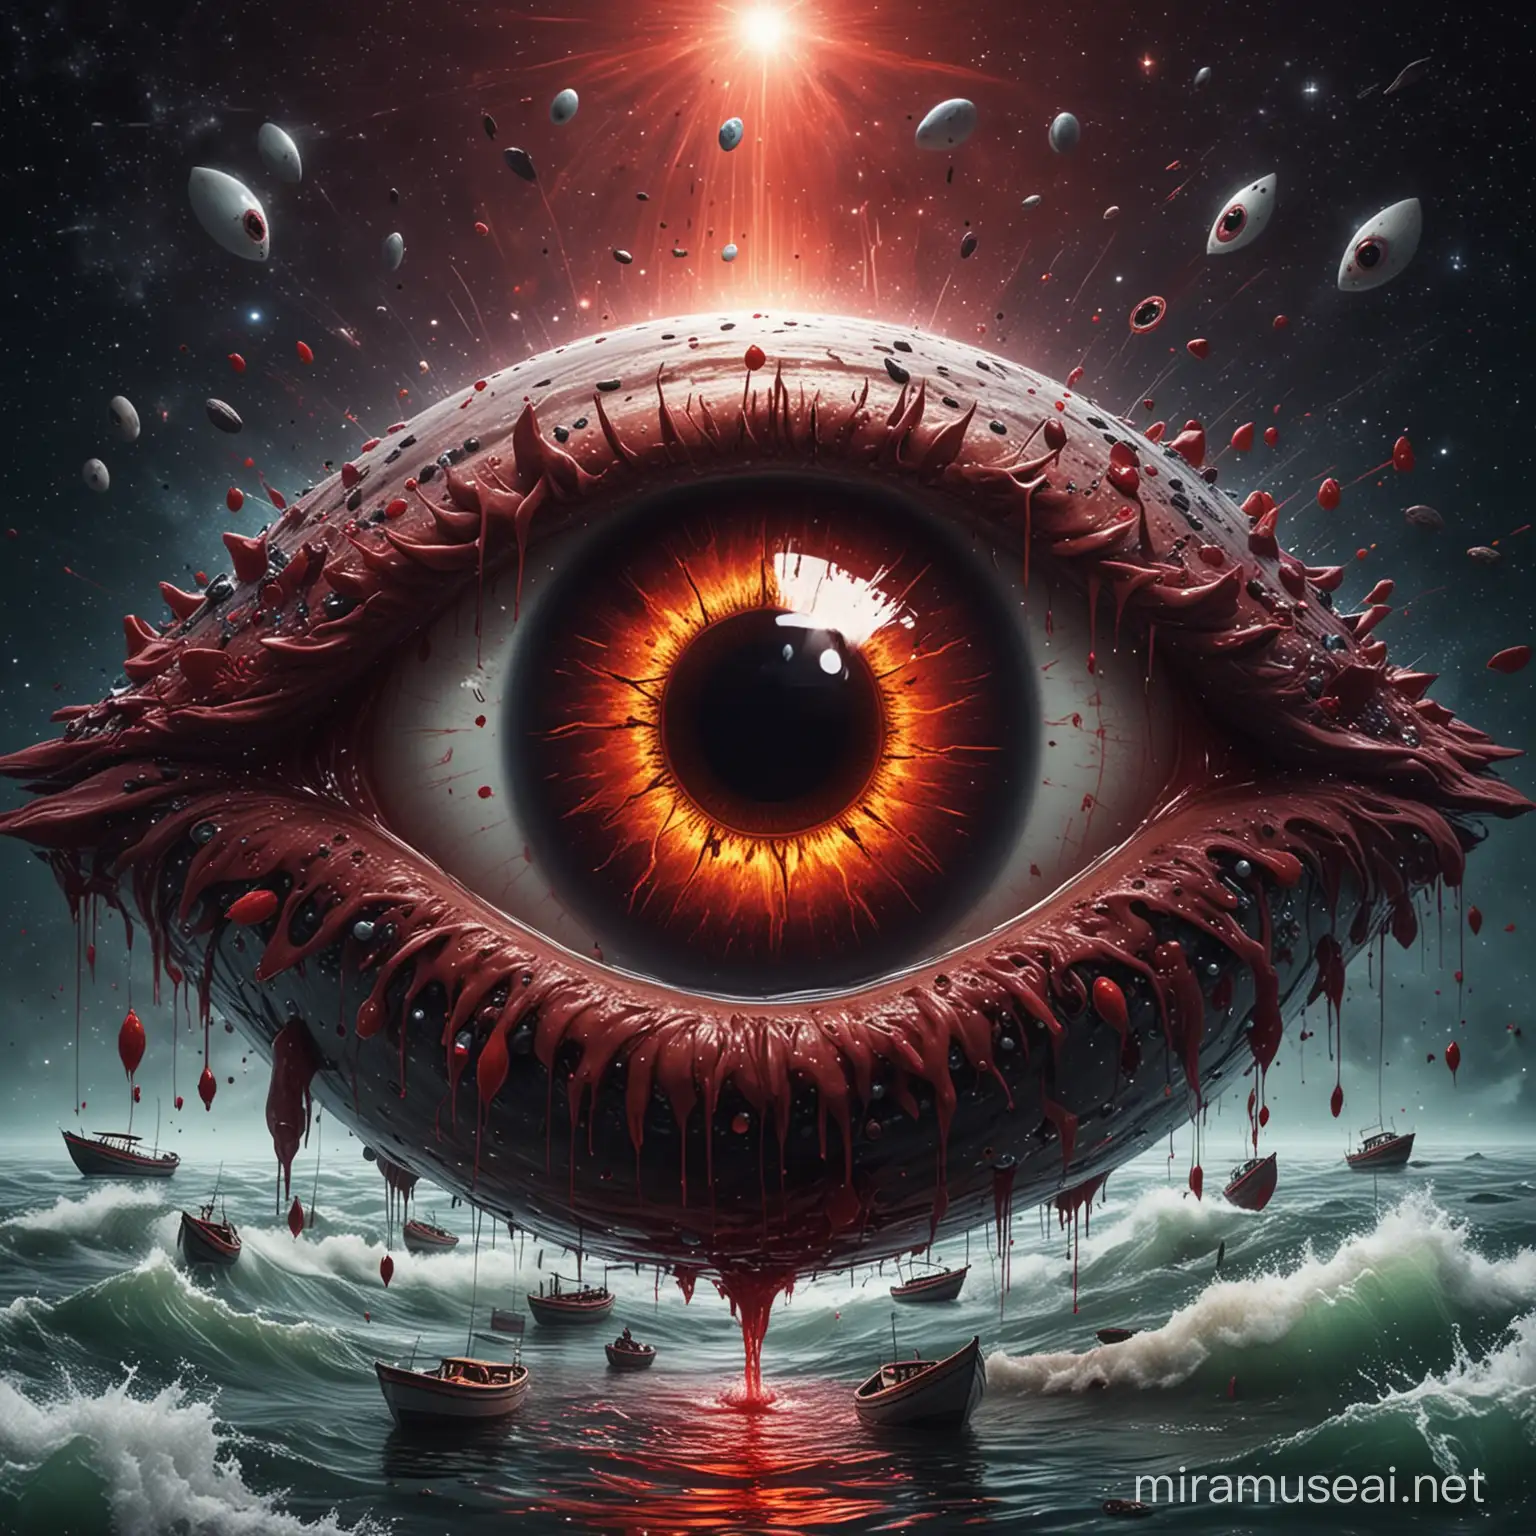 Ethereal Cosmic Scene Giant Bleeding Eye and Tiny Boats in a River of Blood